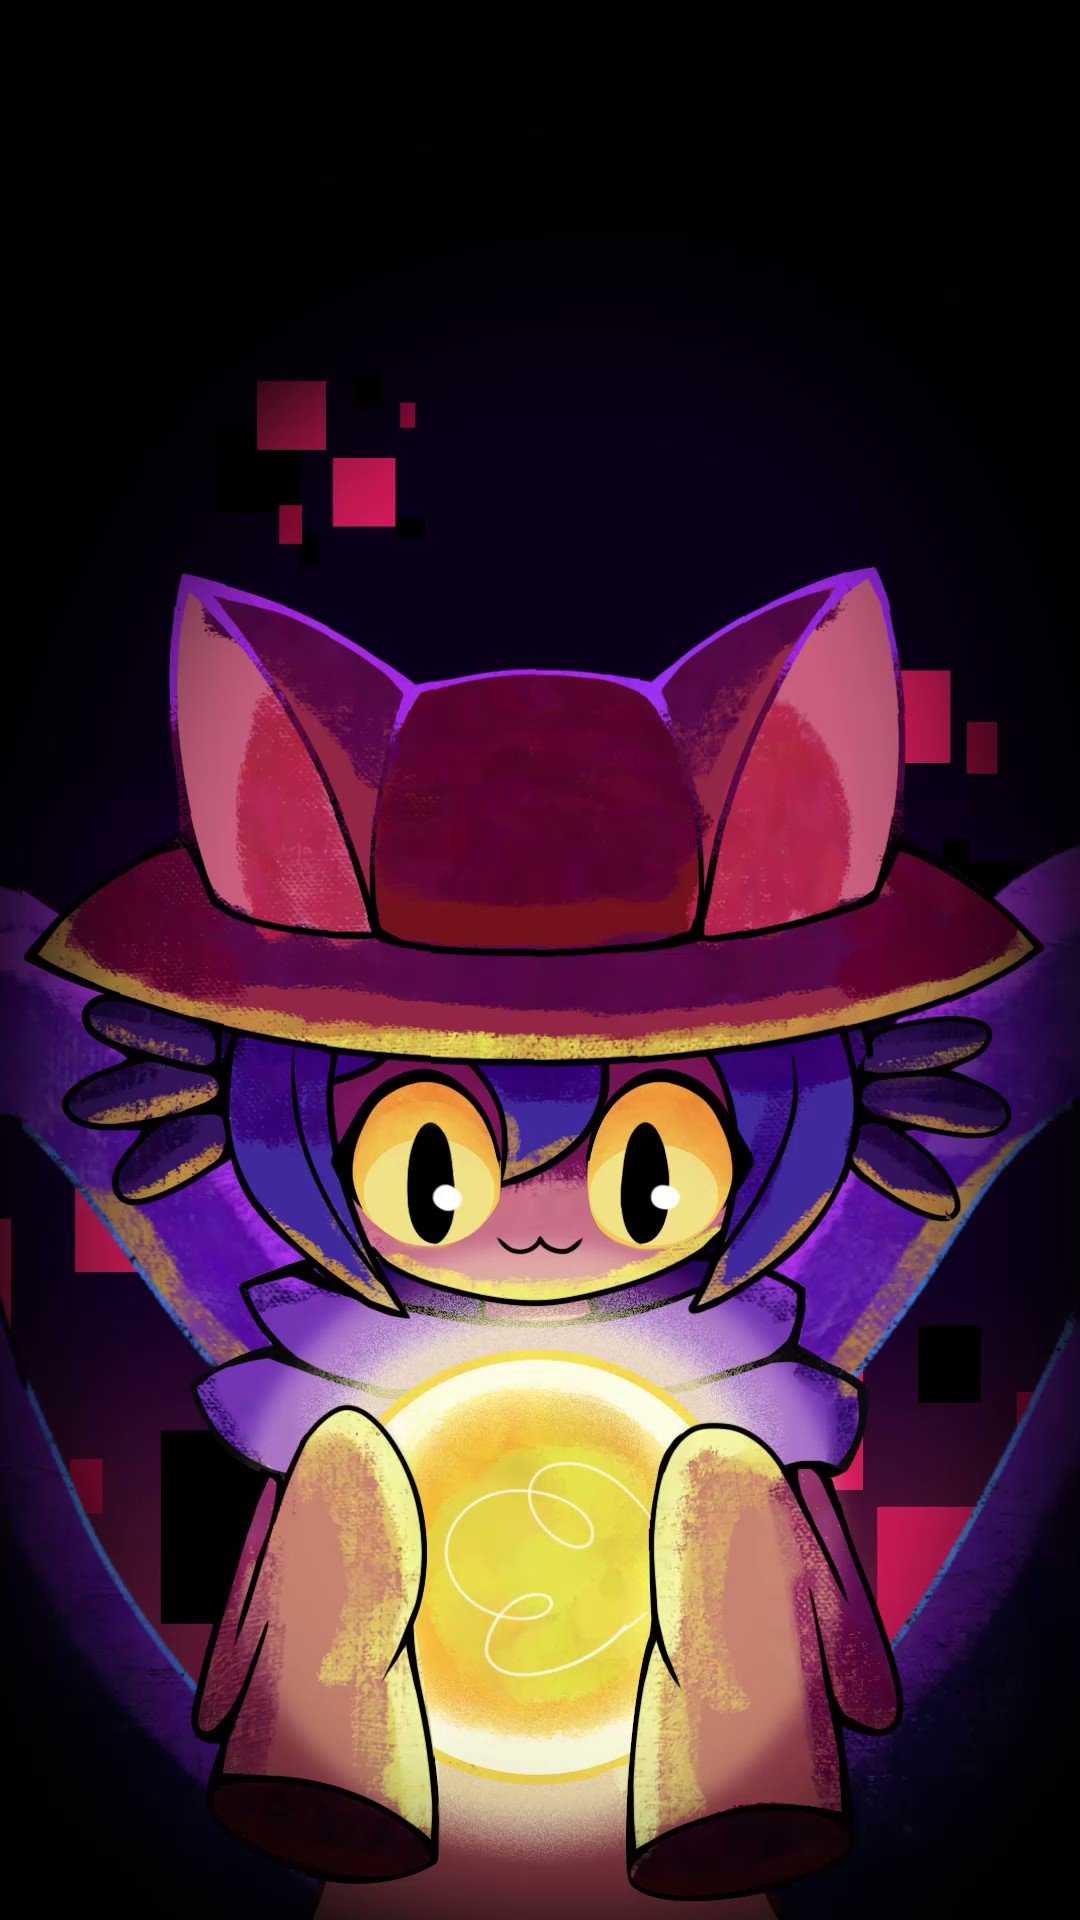 Lukaniko animation I made of Niko from OneShot. Hope you like it! I also made it a wallpaper engine (Link in comments). #OneshotGame #OneShot